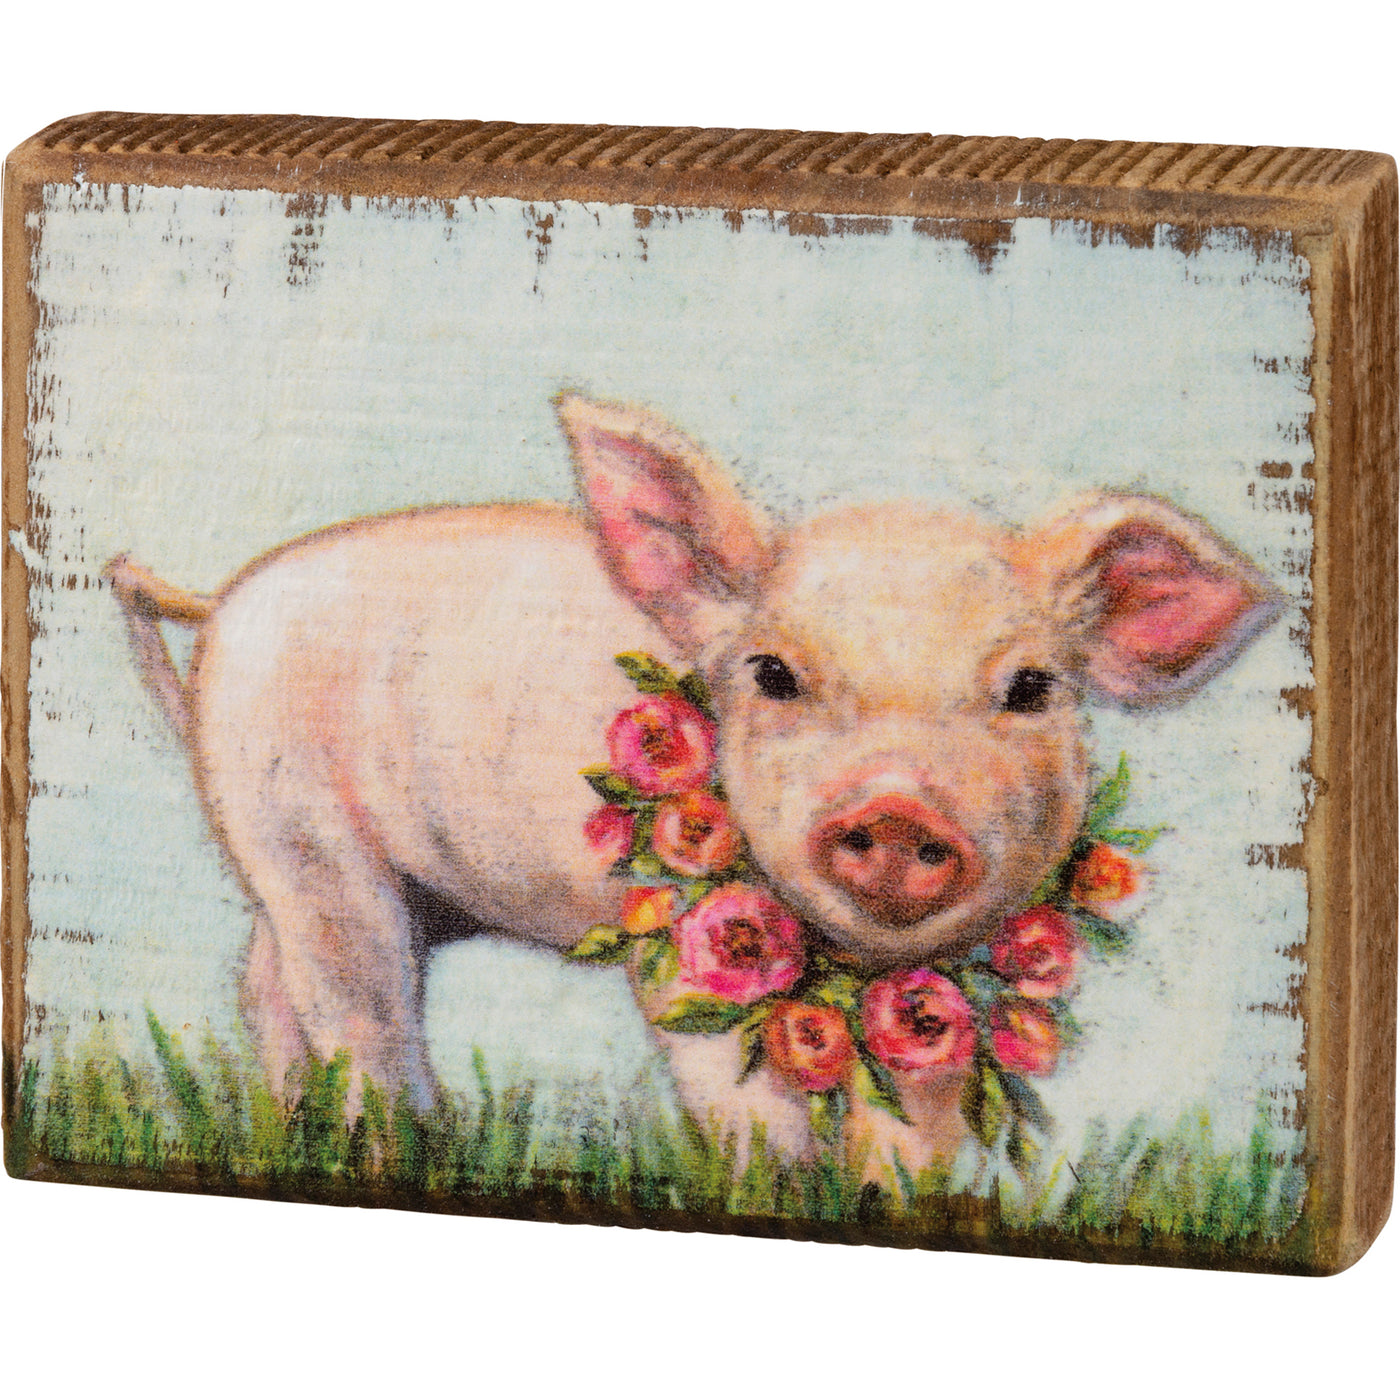 Piglet with Floral Wreath Block Sign